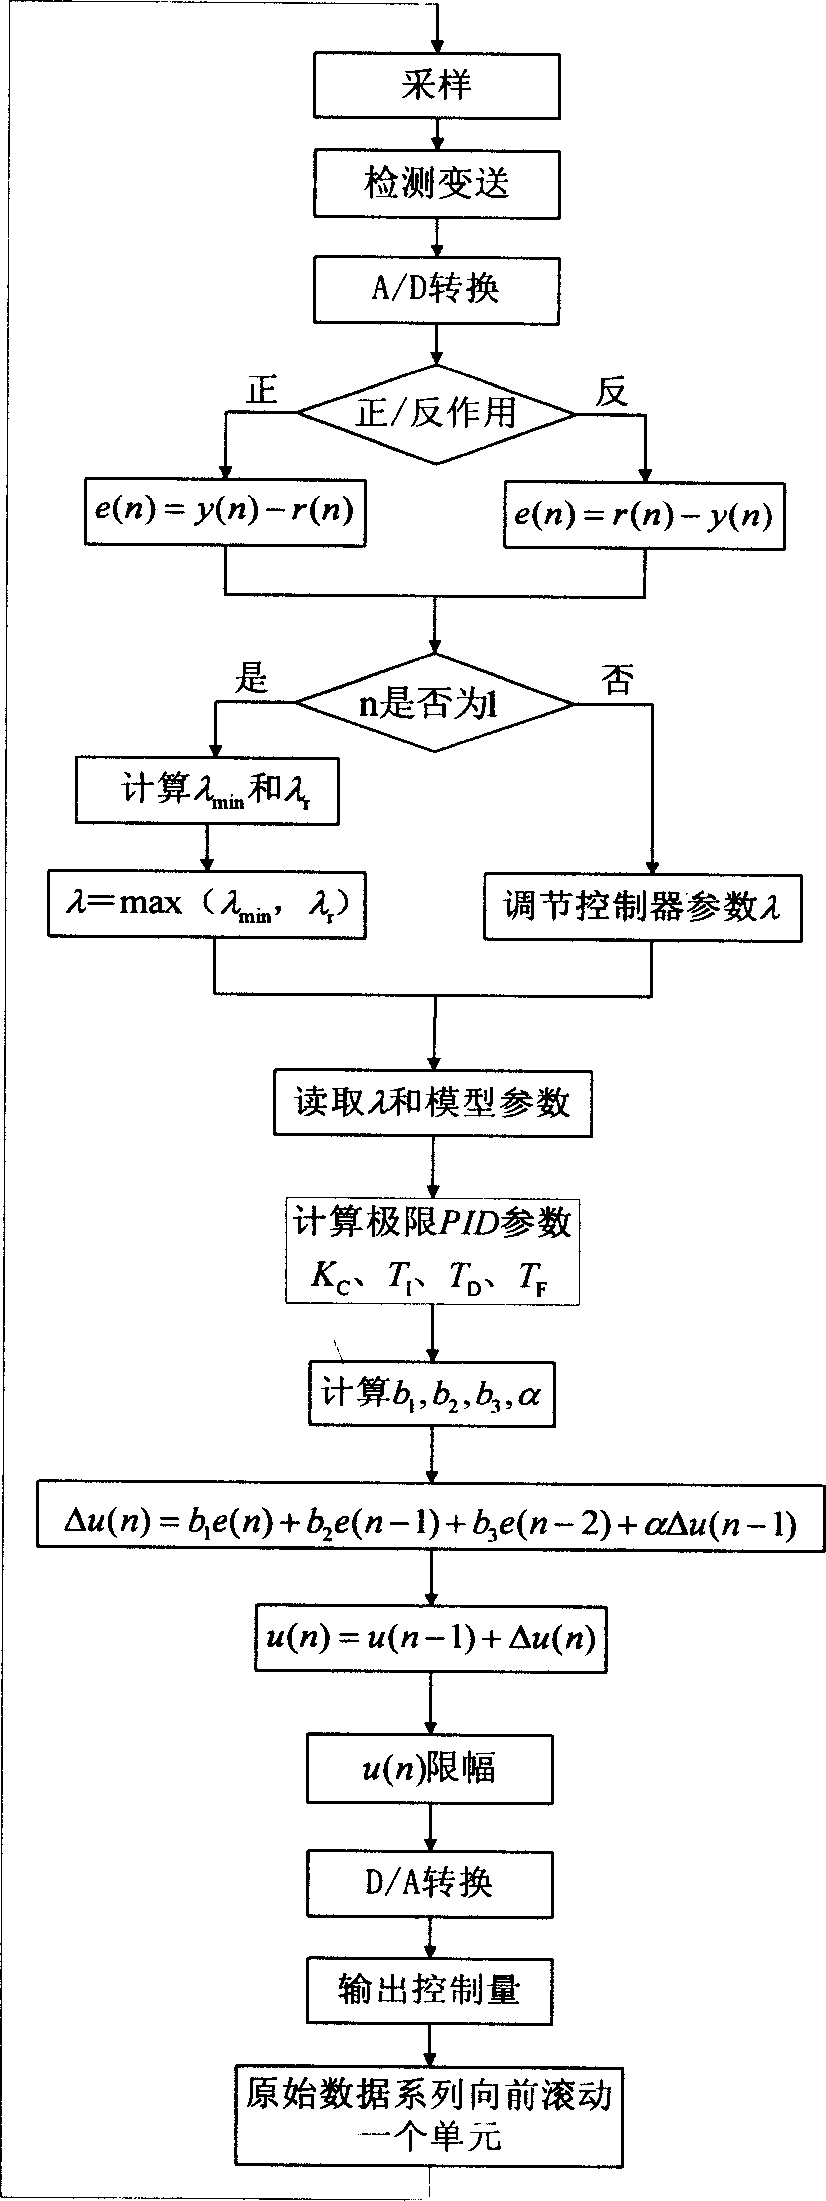 Limsting PID control method of single input single output system